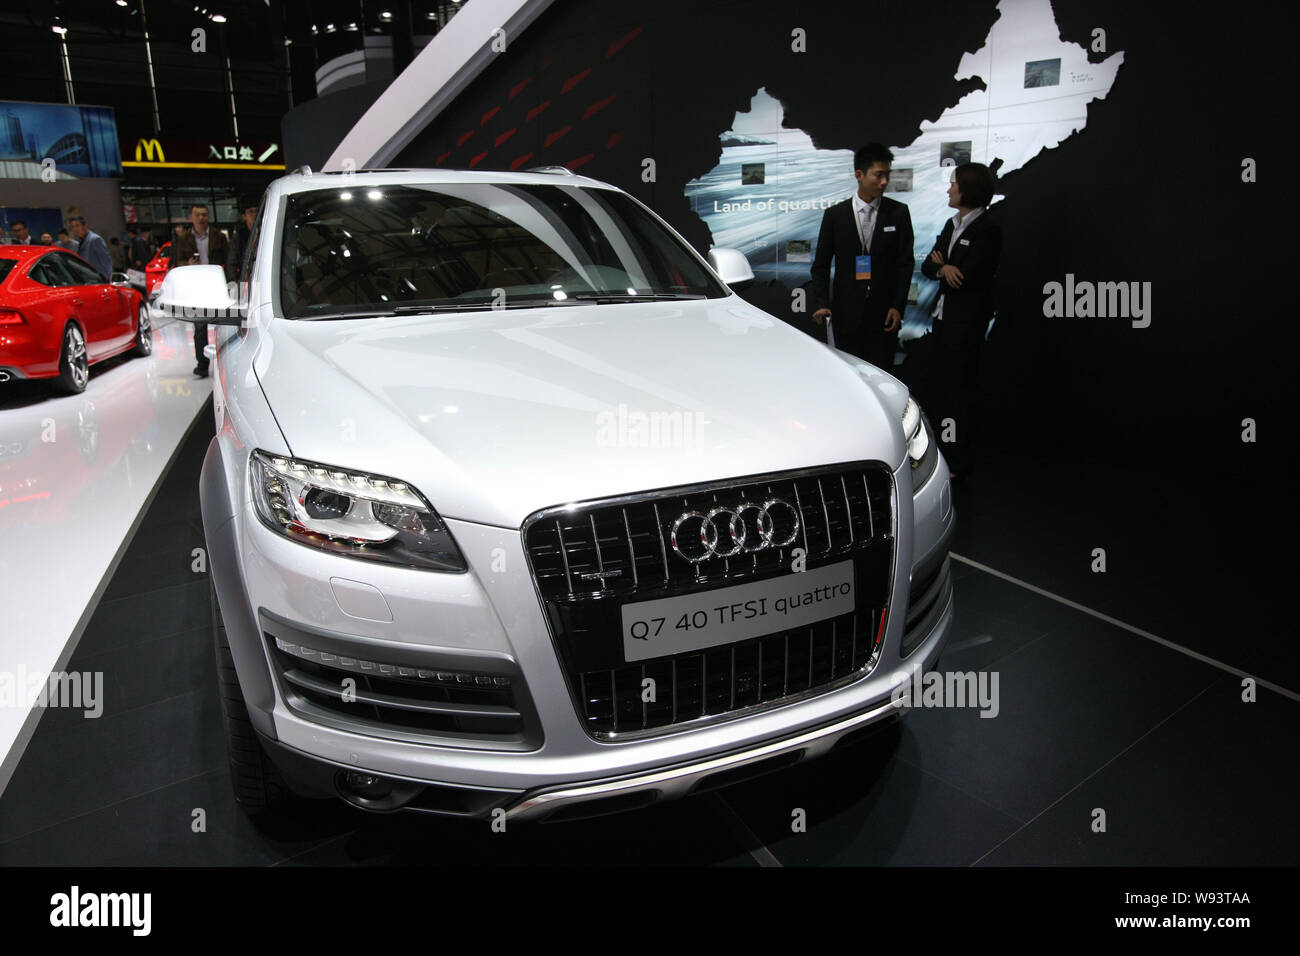 --FILE--An imported Audi Q7 40 TFSI quattro is displayed during the 15th Shanghai International Automobile Industry Exhibition, known as Auto Shanghai Stock Photo